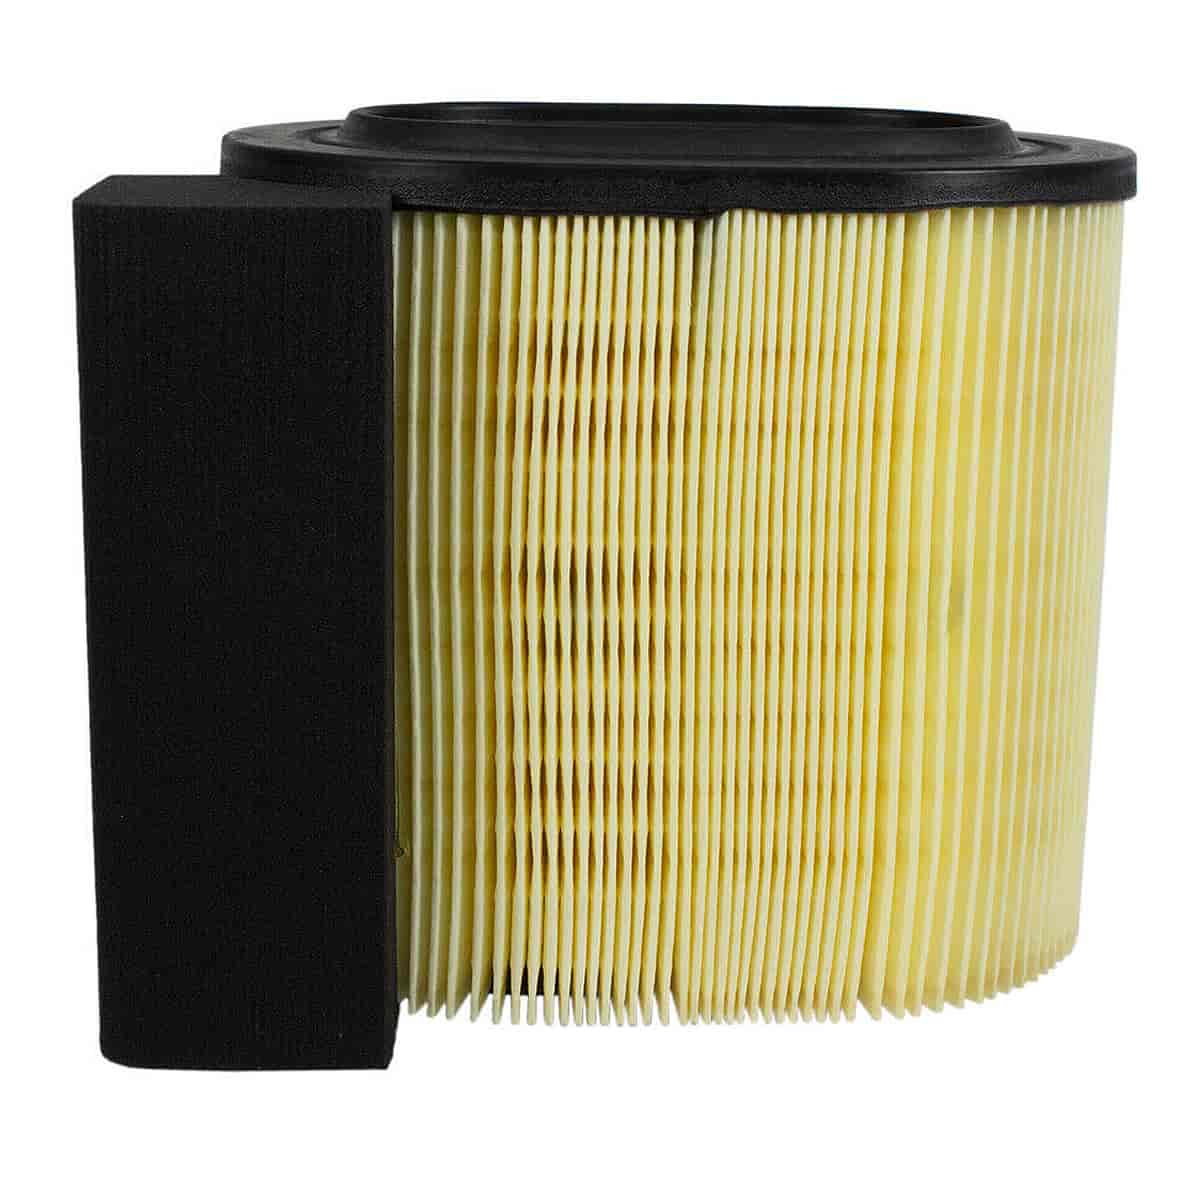 Air Filter for Ford F-Series Trucks